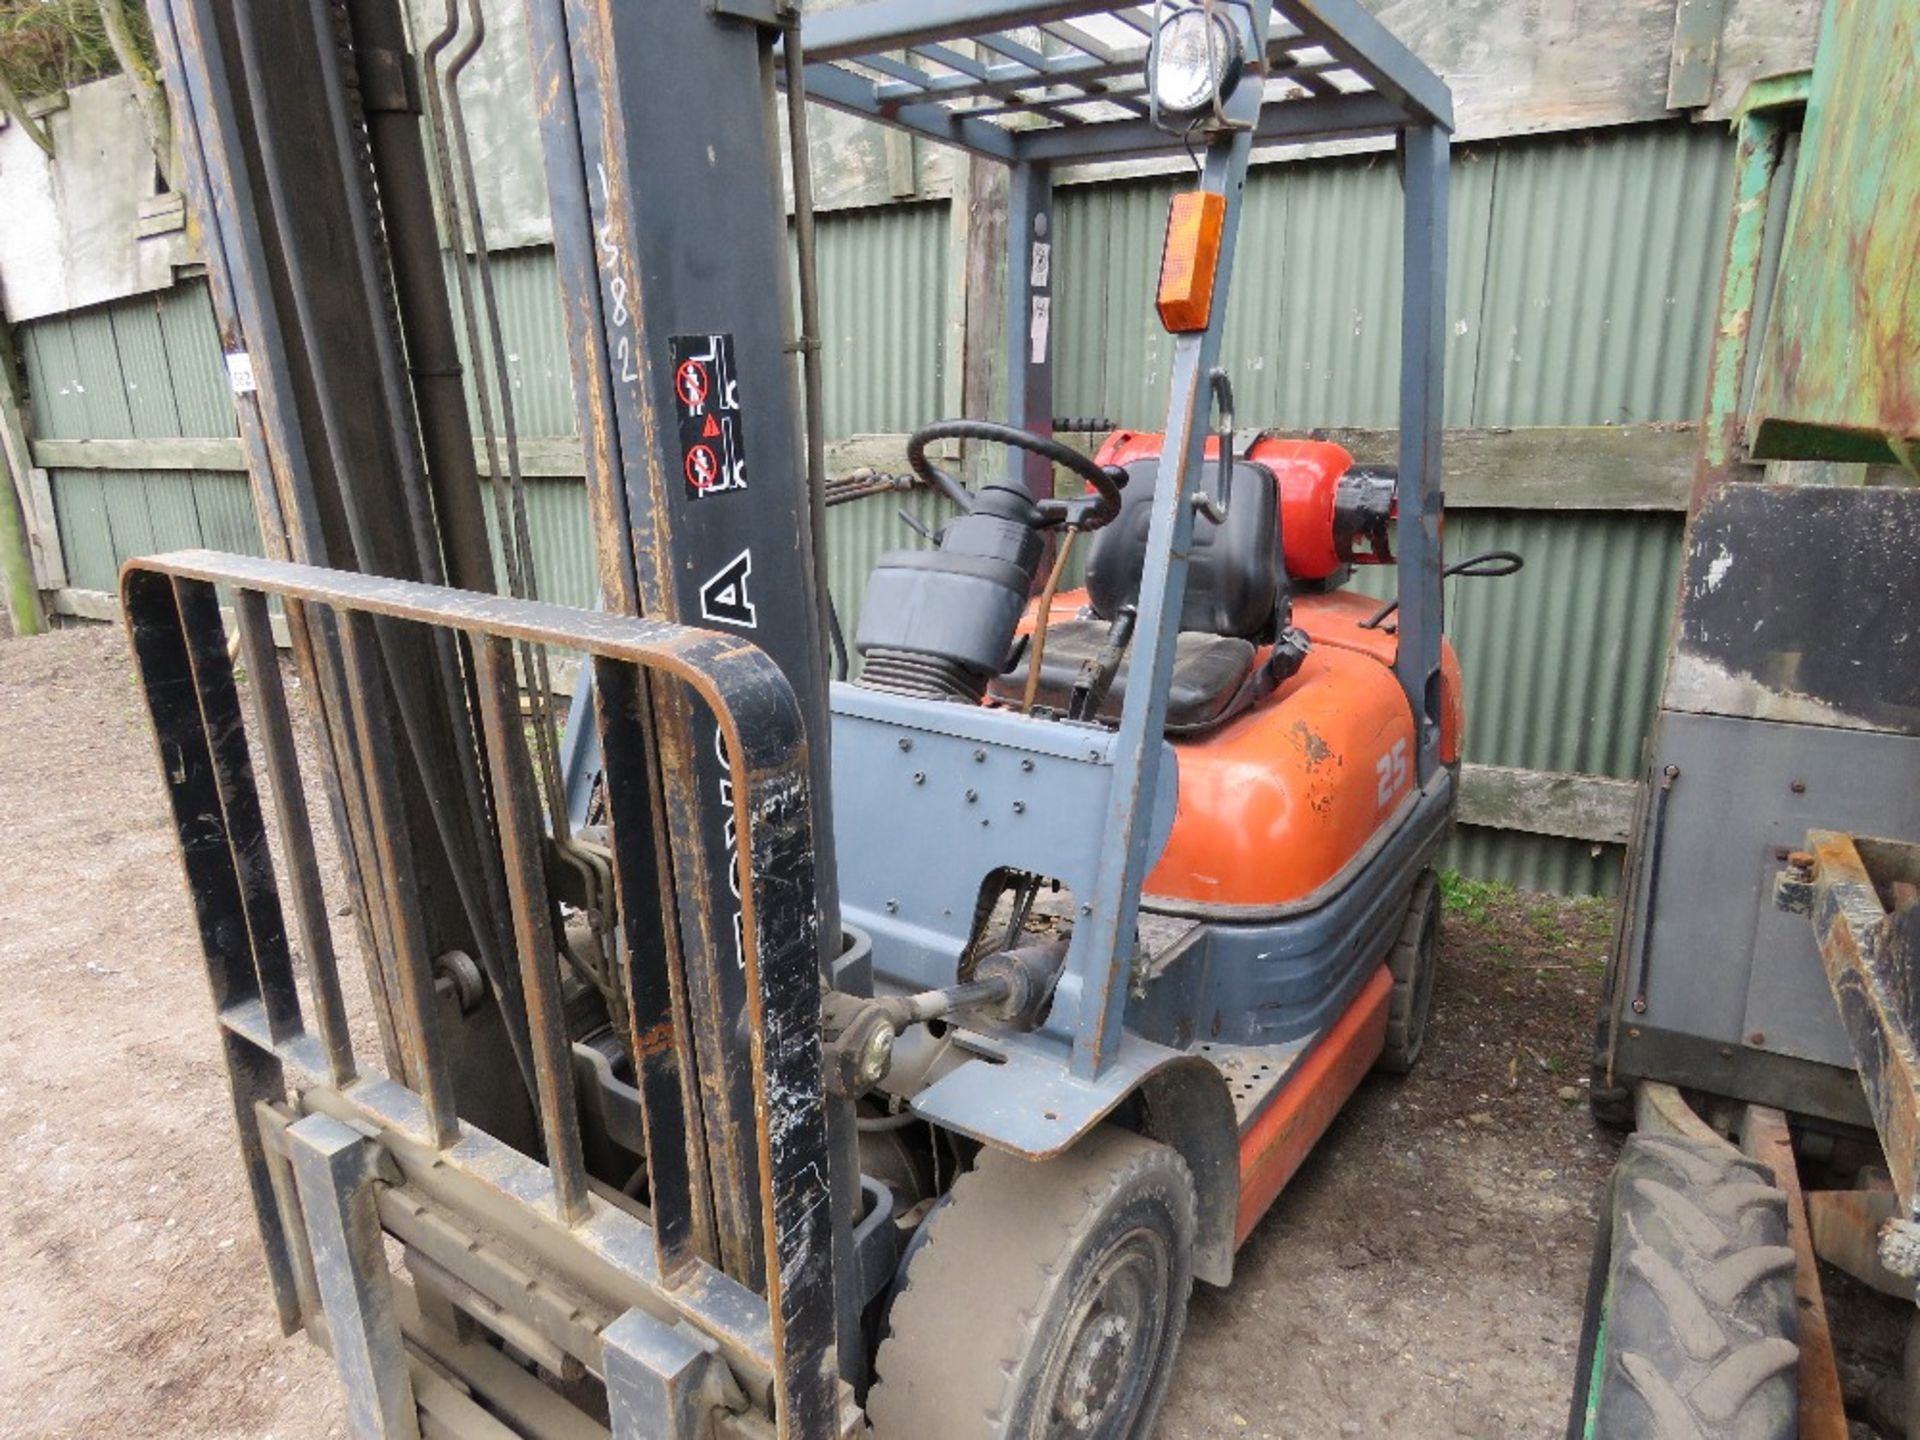 TOYOTA 25 GAS FORKLIFT TRUCK WITH SIDE SHIFT. 8994 REC HOURS. SN:406FGF25@21005 WHEN TESTED WAS SEE - Image 3 of 11